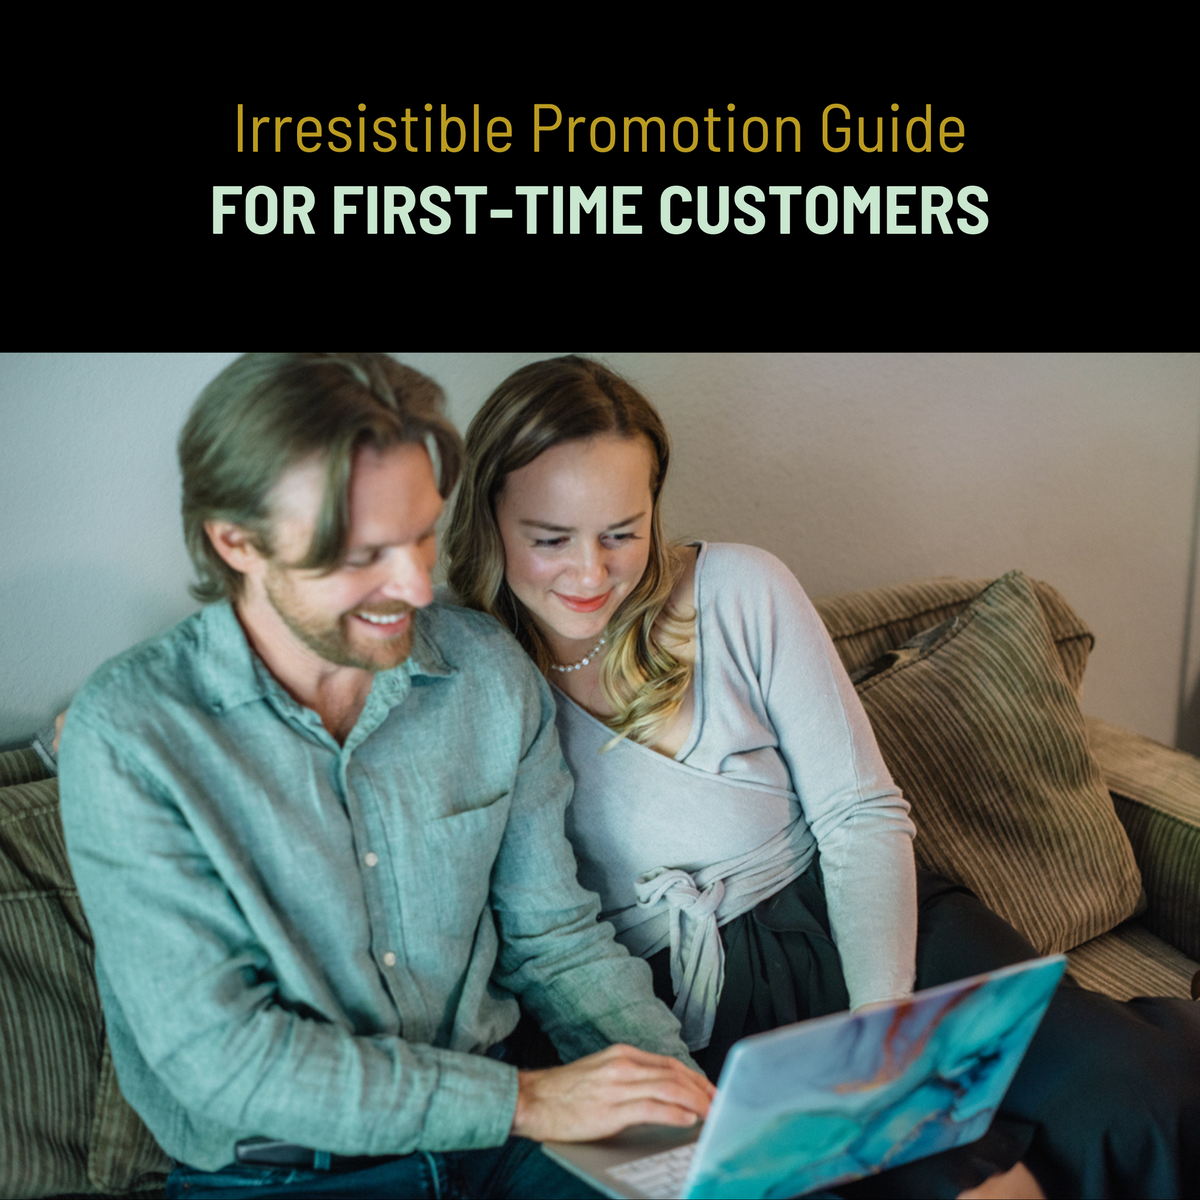 Irresistible Promotion Guide For First-Time Customers